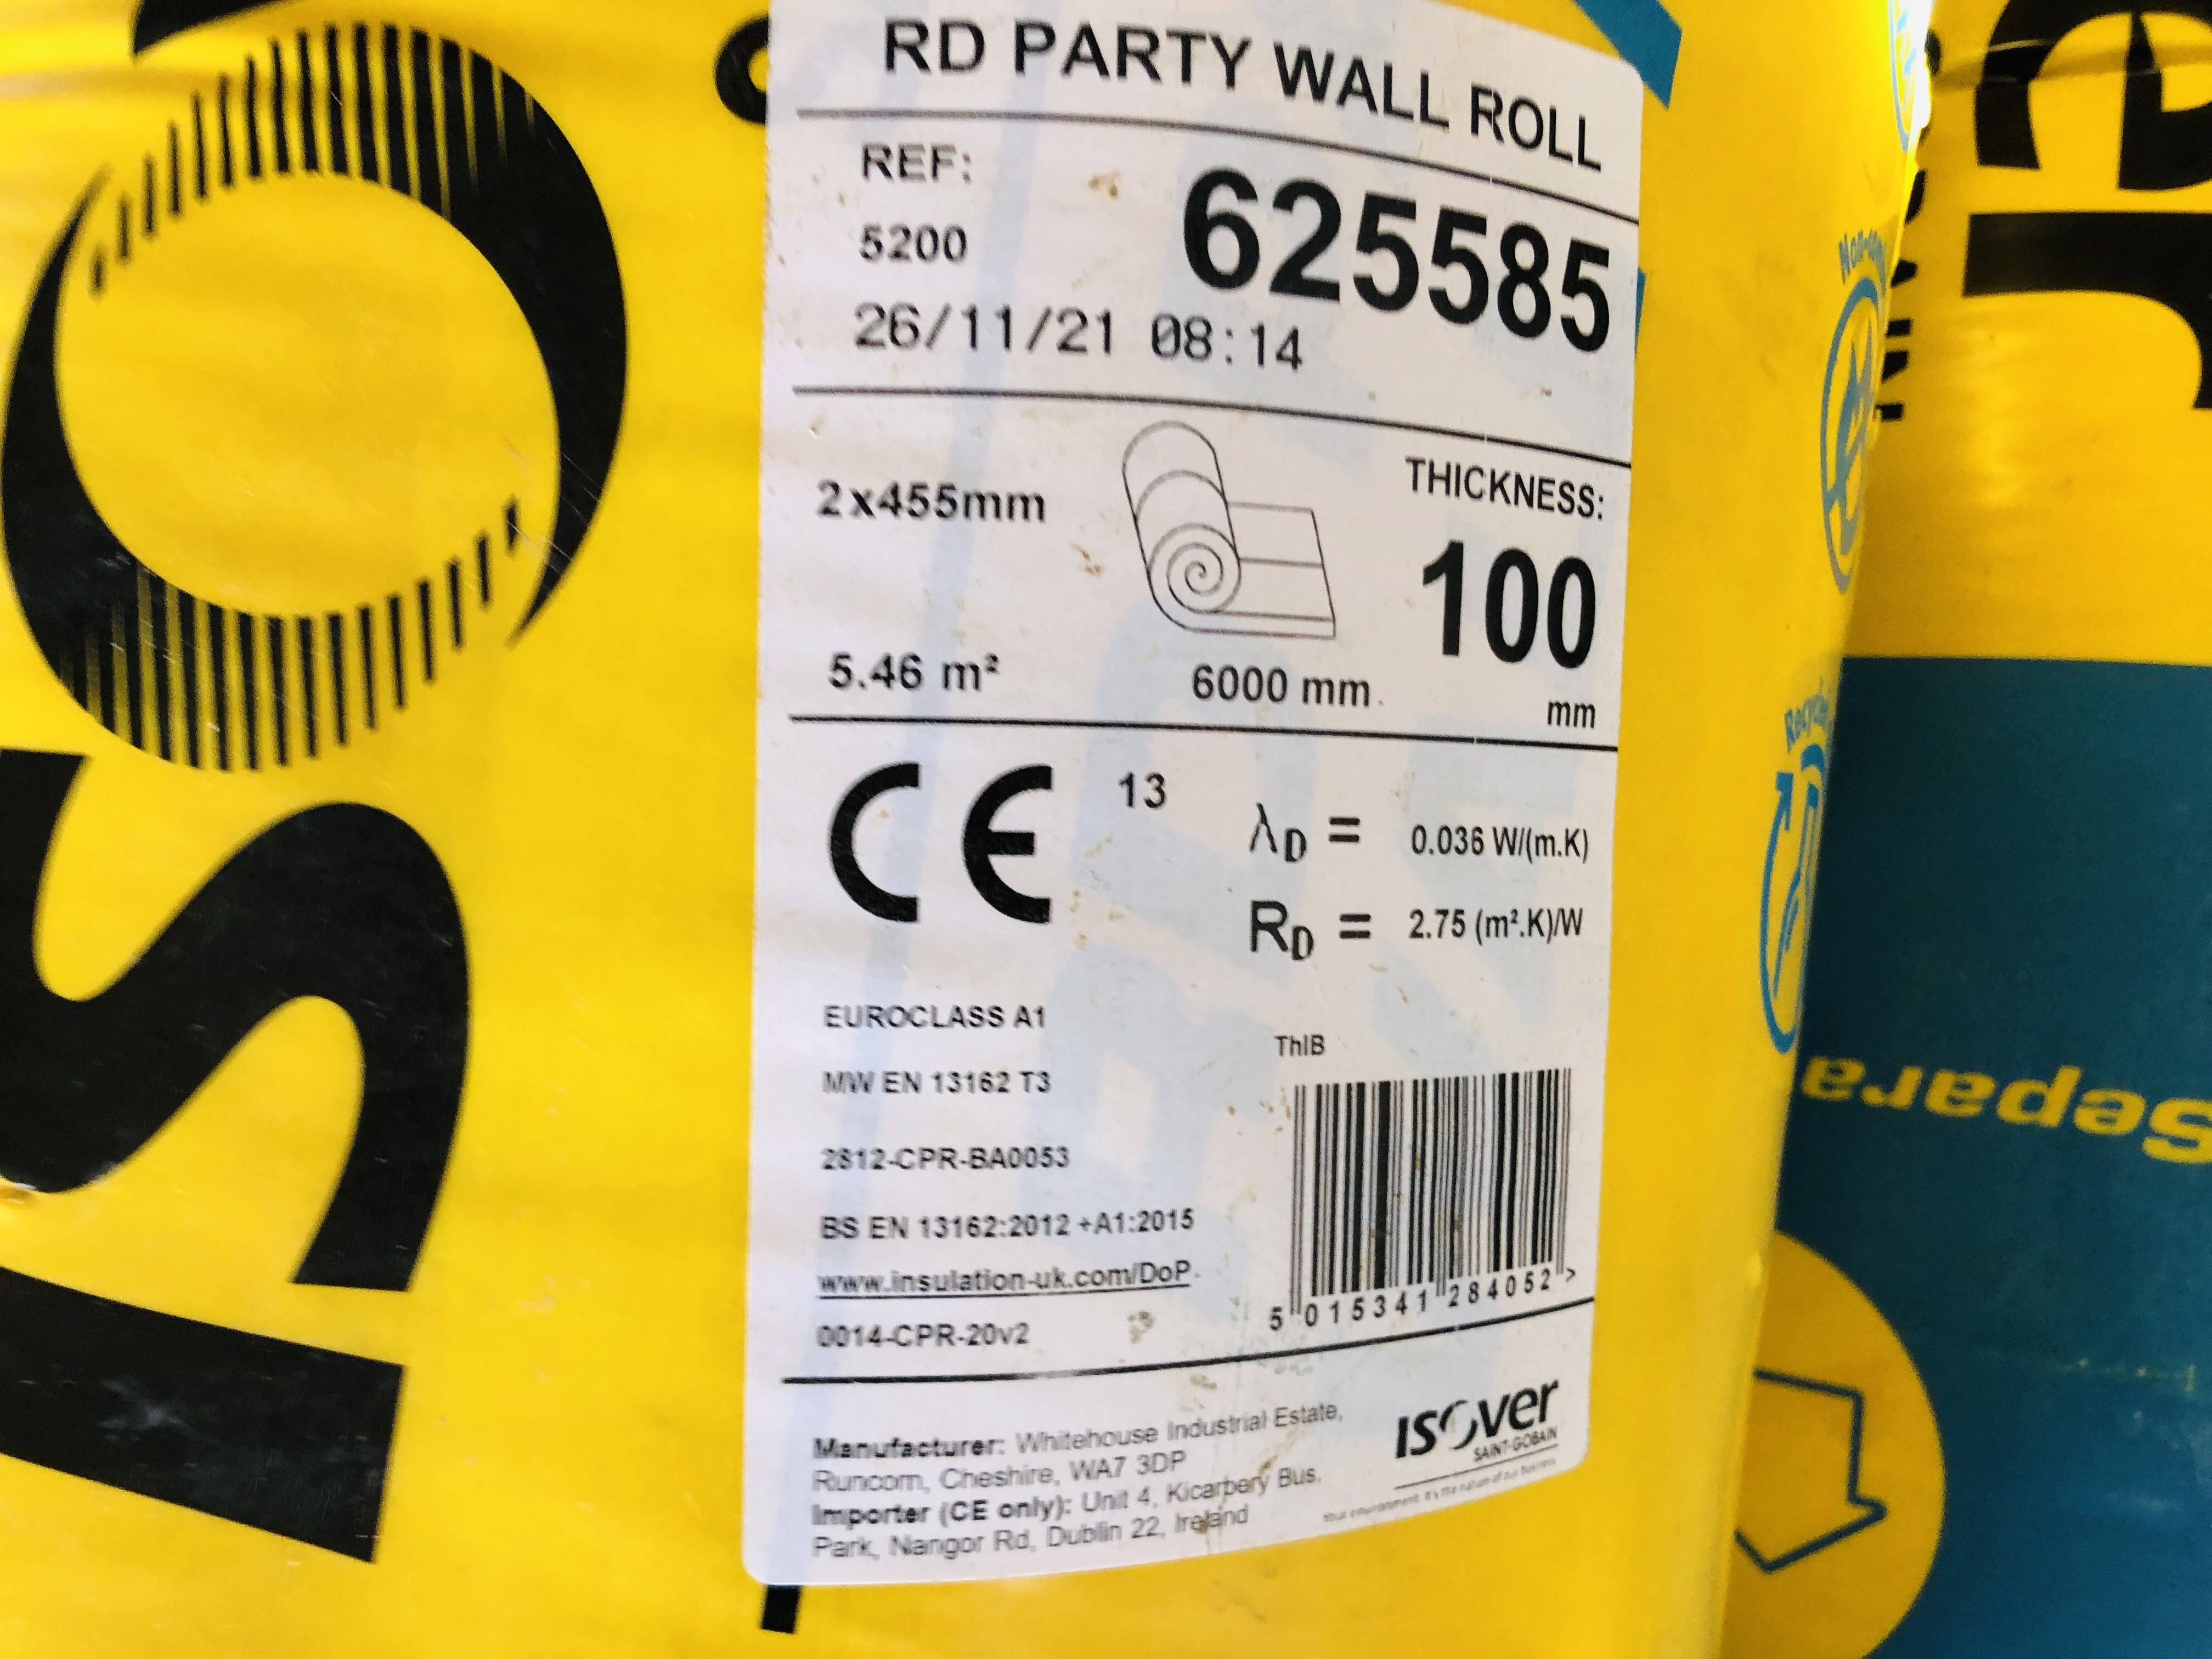 4 X ROLLS ISOVER 100MM PARTY WALL INSULATION - Image 2 of 2